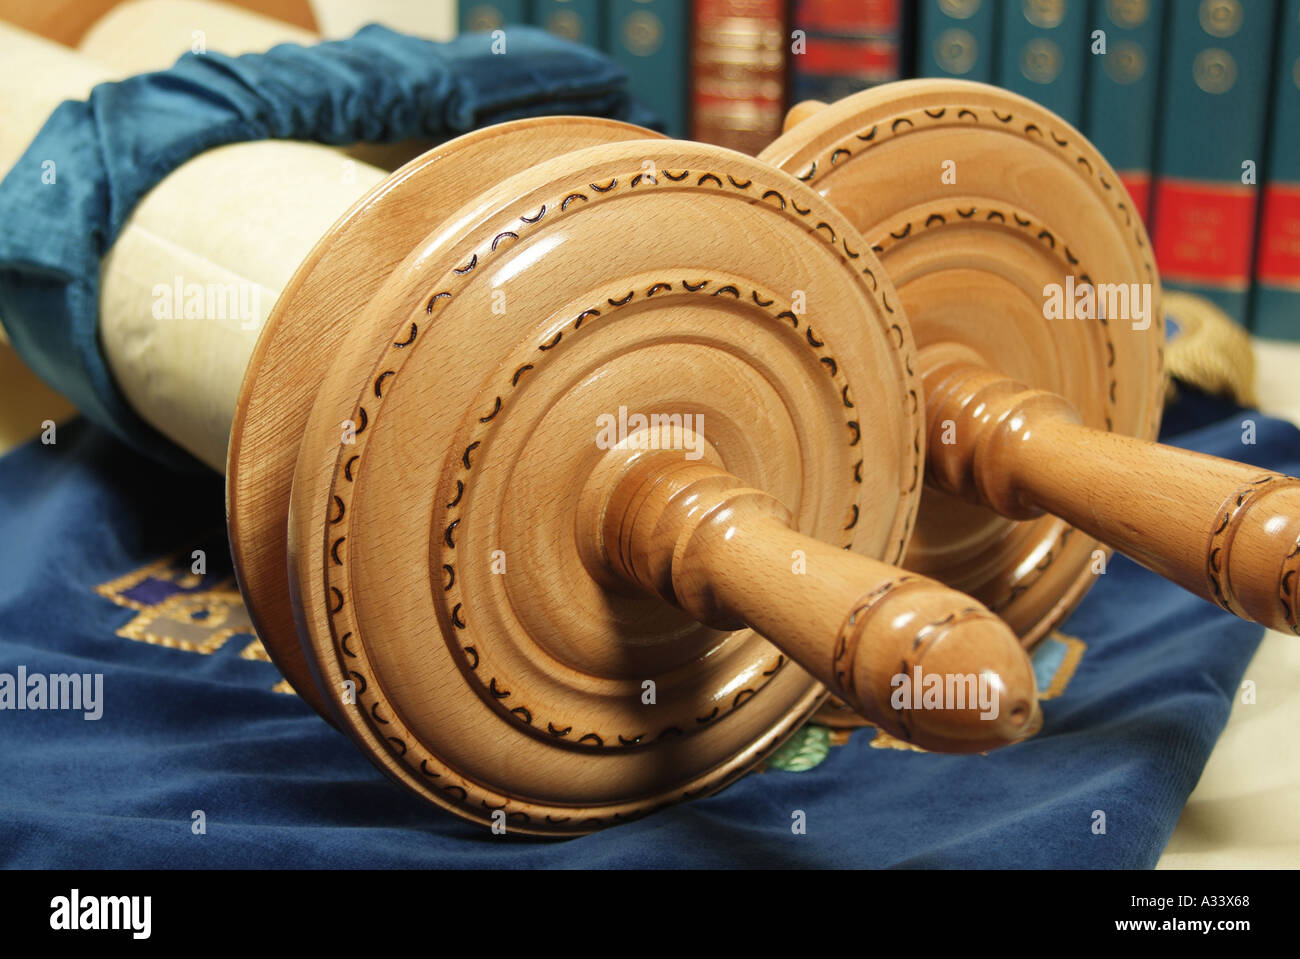 Rolled up Torah scroll with holy books in background Stock Photo